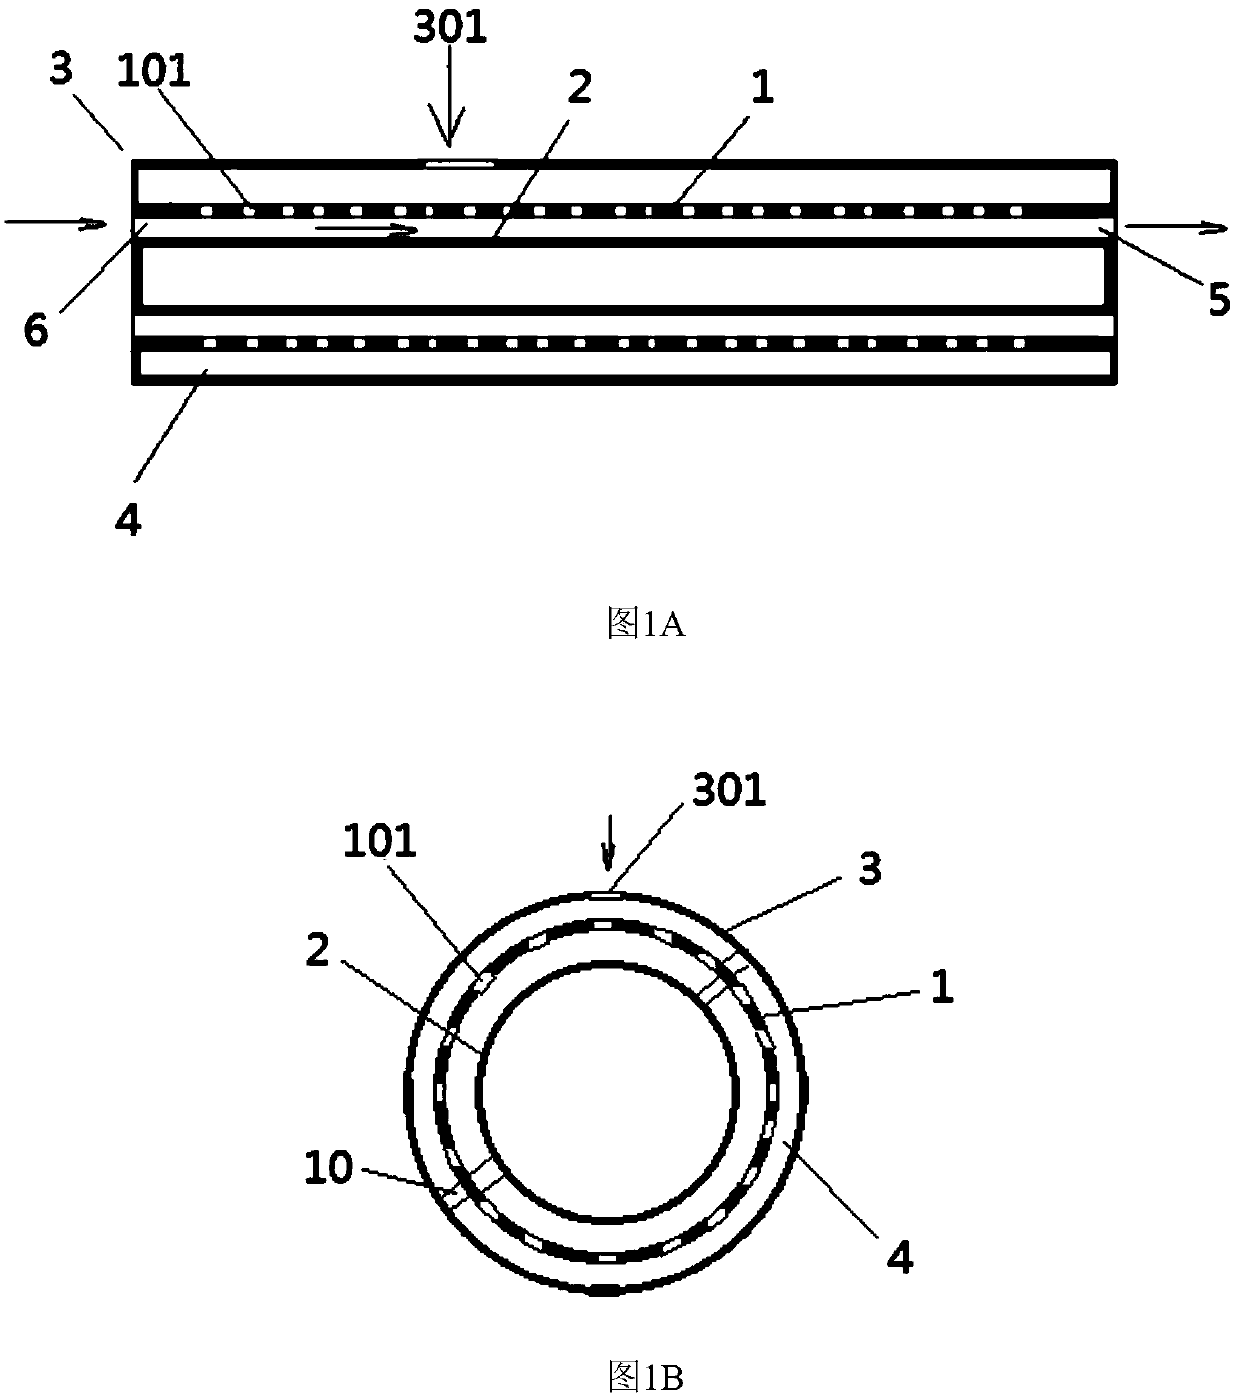 Membrane emulsification assembly for producing micron-sized micro-spheres and application of membrane emulsification assembly for producing micron-sized micro-spheres